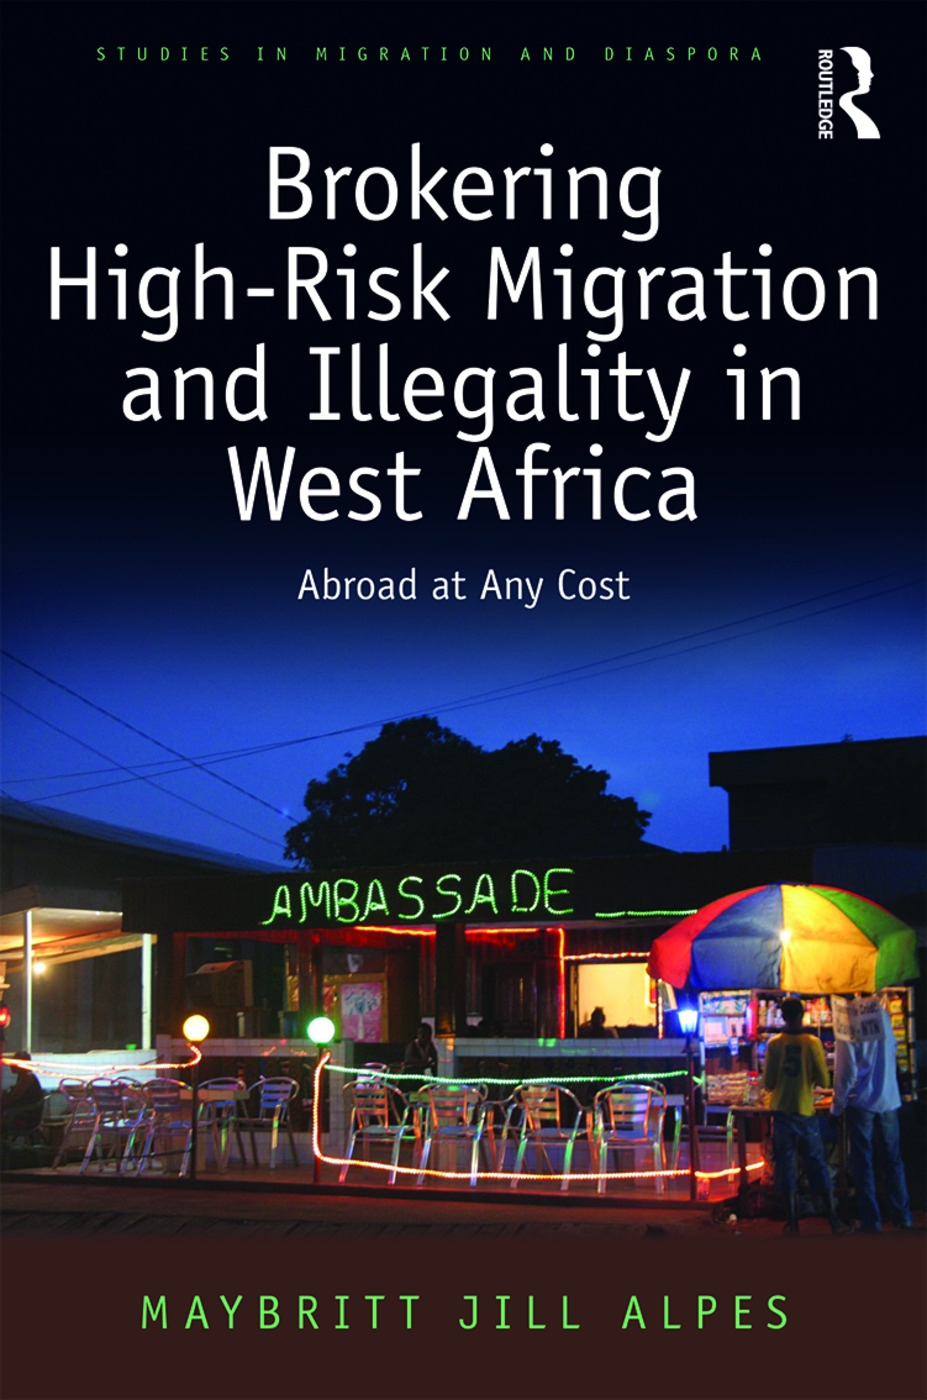 Brokering High-Risk Migration and Illegality in West Africa: Abroad at Any Cost